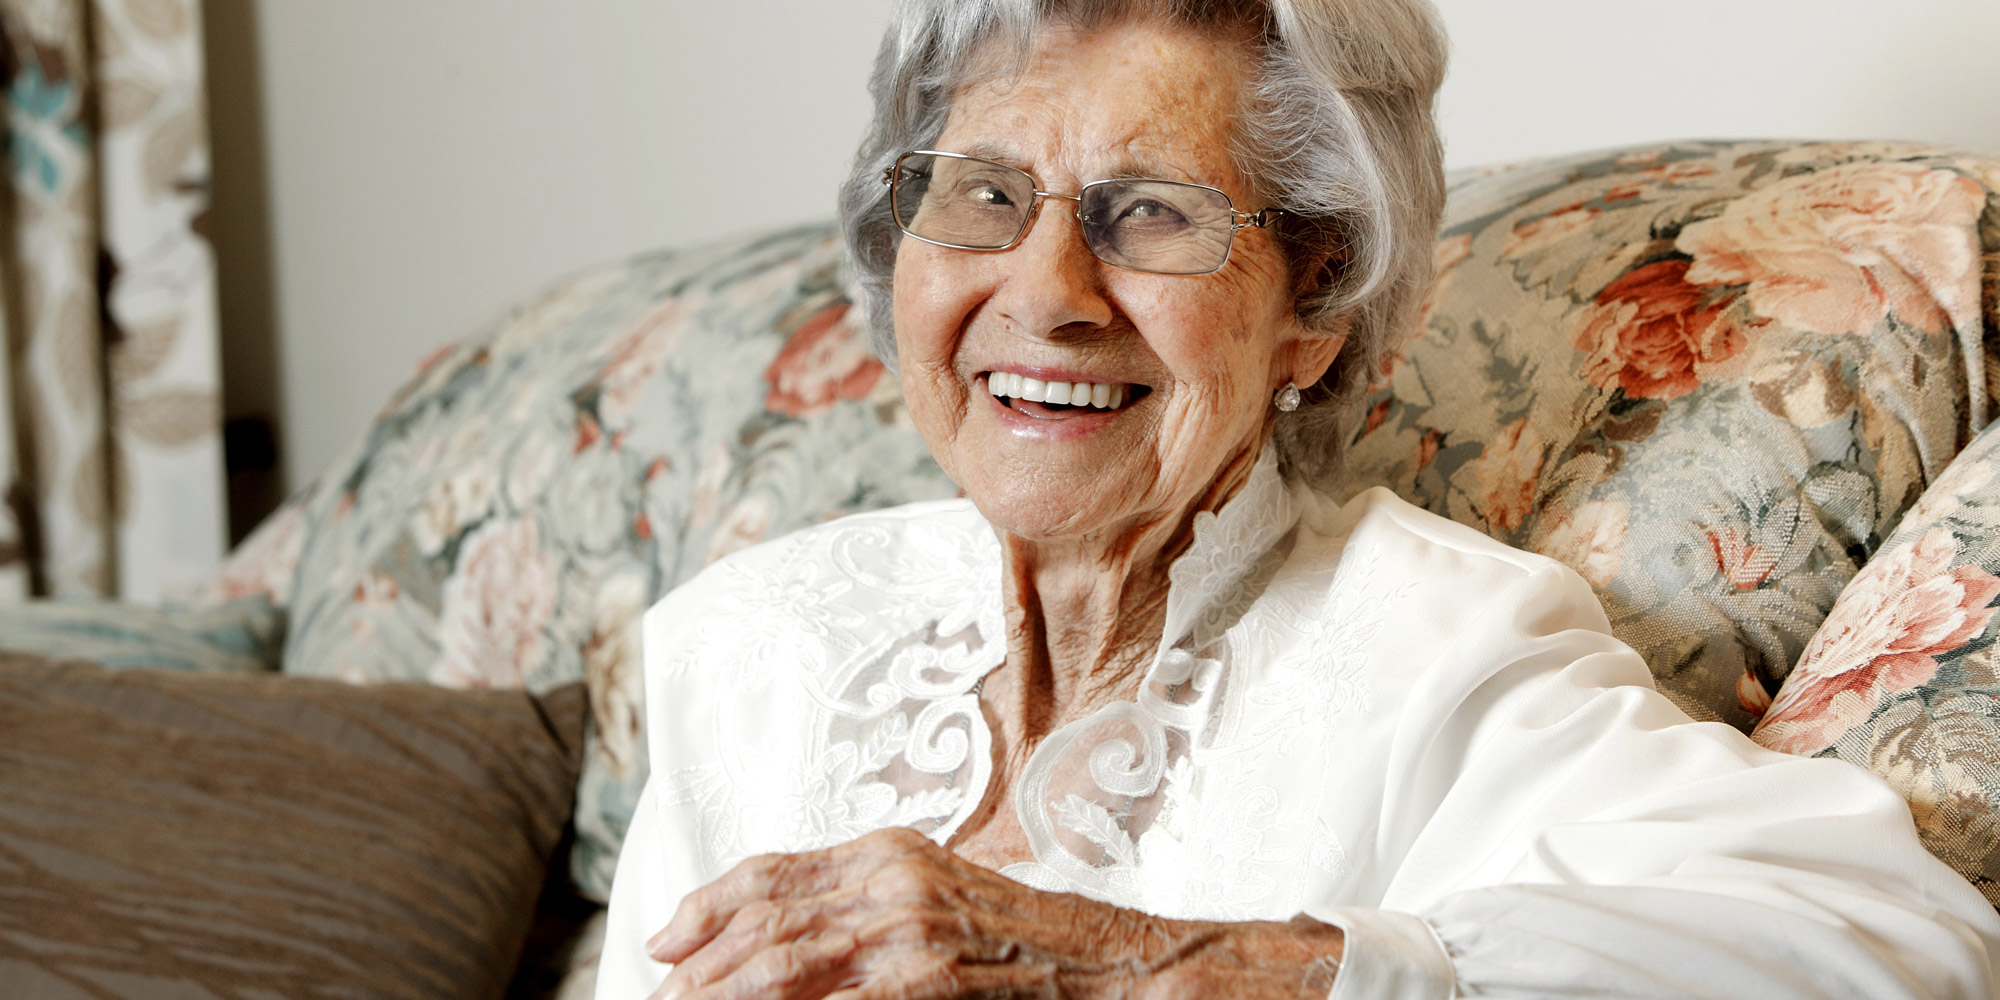 KinCare centenarian, Dorothy Yeomans smiling widely on her floral couch